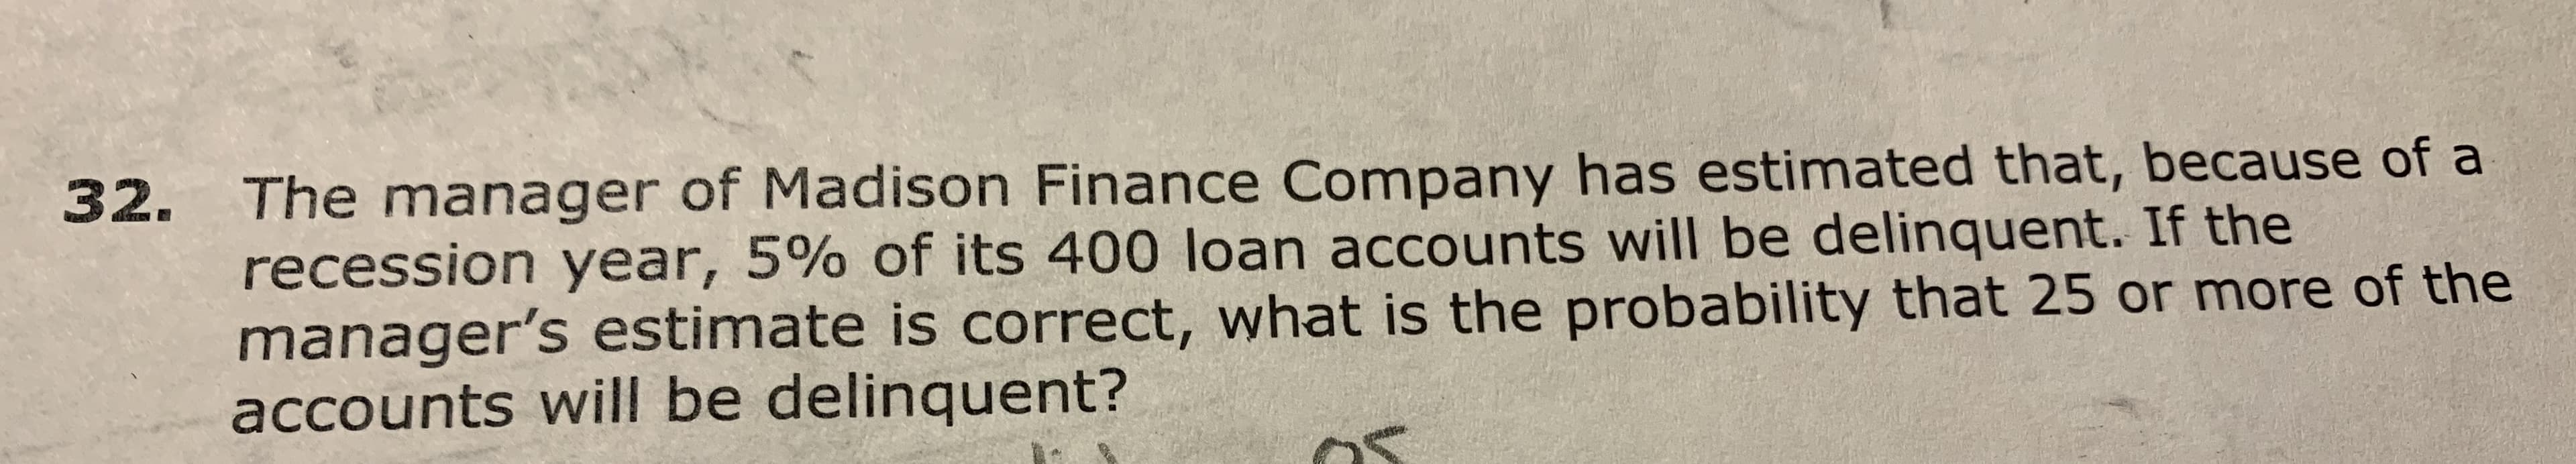 The manager of Madison Finance Company has estimated that, because of a
recession year, 5% of its 400 loan accounts will be delinquent. If the
manager's estimate is correct, what is the probability that 25 or more of the
accounts will be delinquent?
32.
